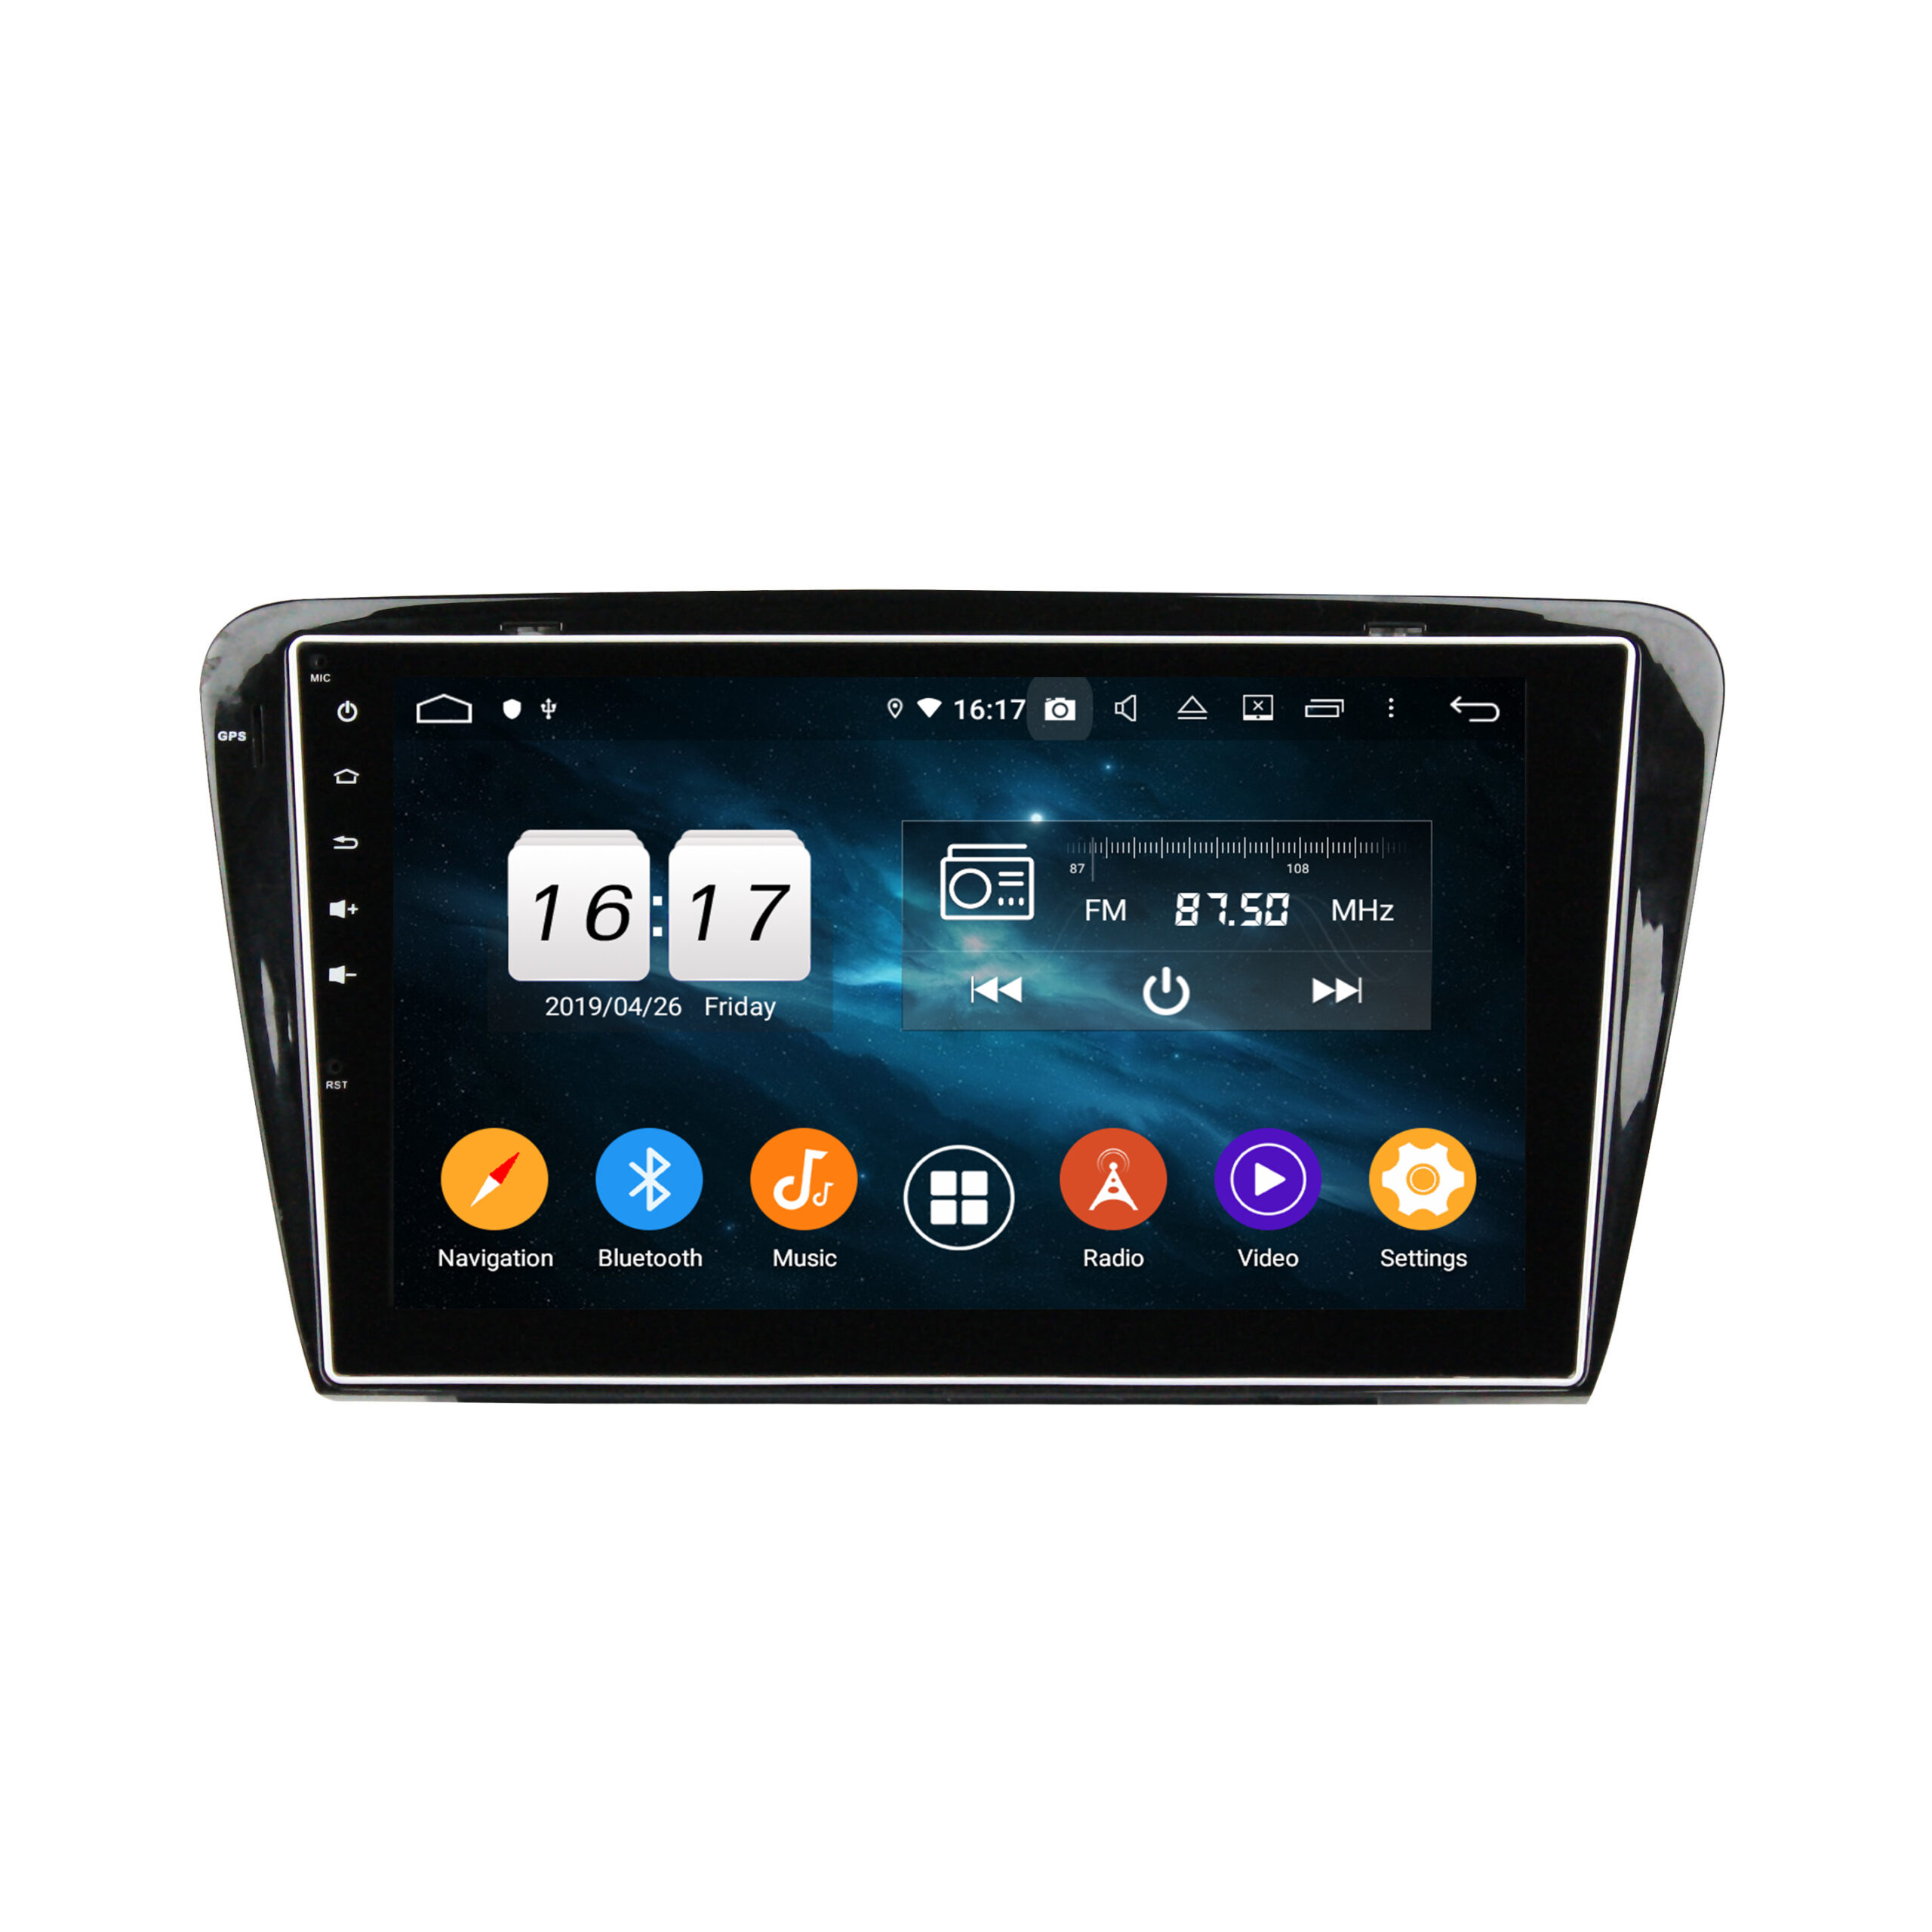 KD-1025 chinese android car stereo car radio Player for Octavia